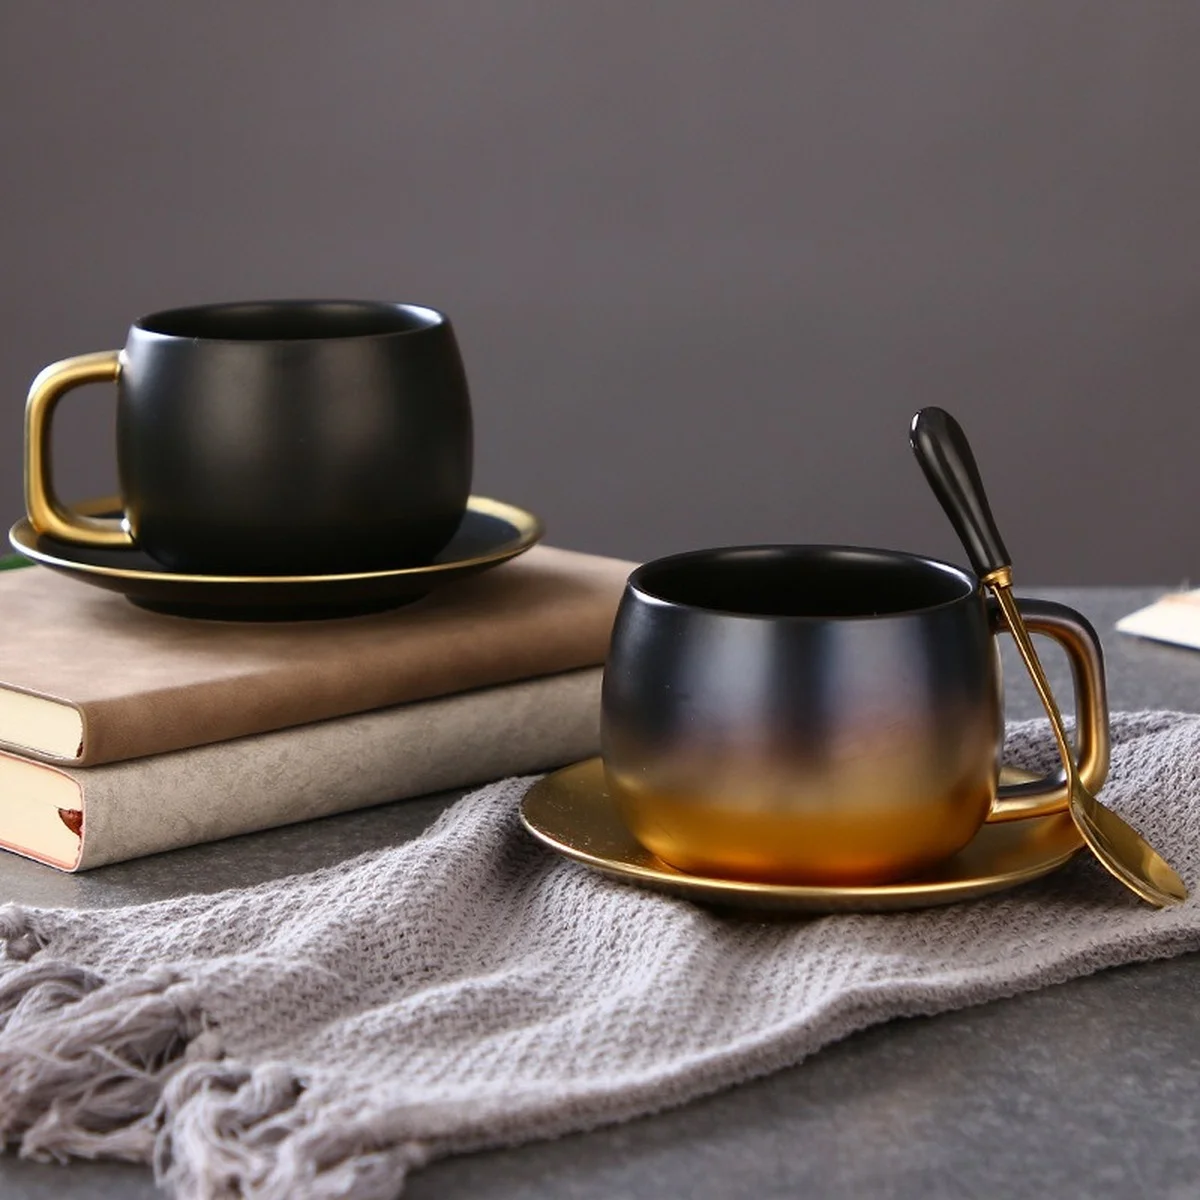 

Luxury Elegant Porcelain Cup With Saucer Spoon Matte Ceramic Gold Black Coffee Mug Simple Teacup Gift For Men Boss Friend Couple